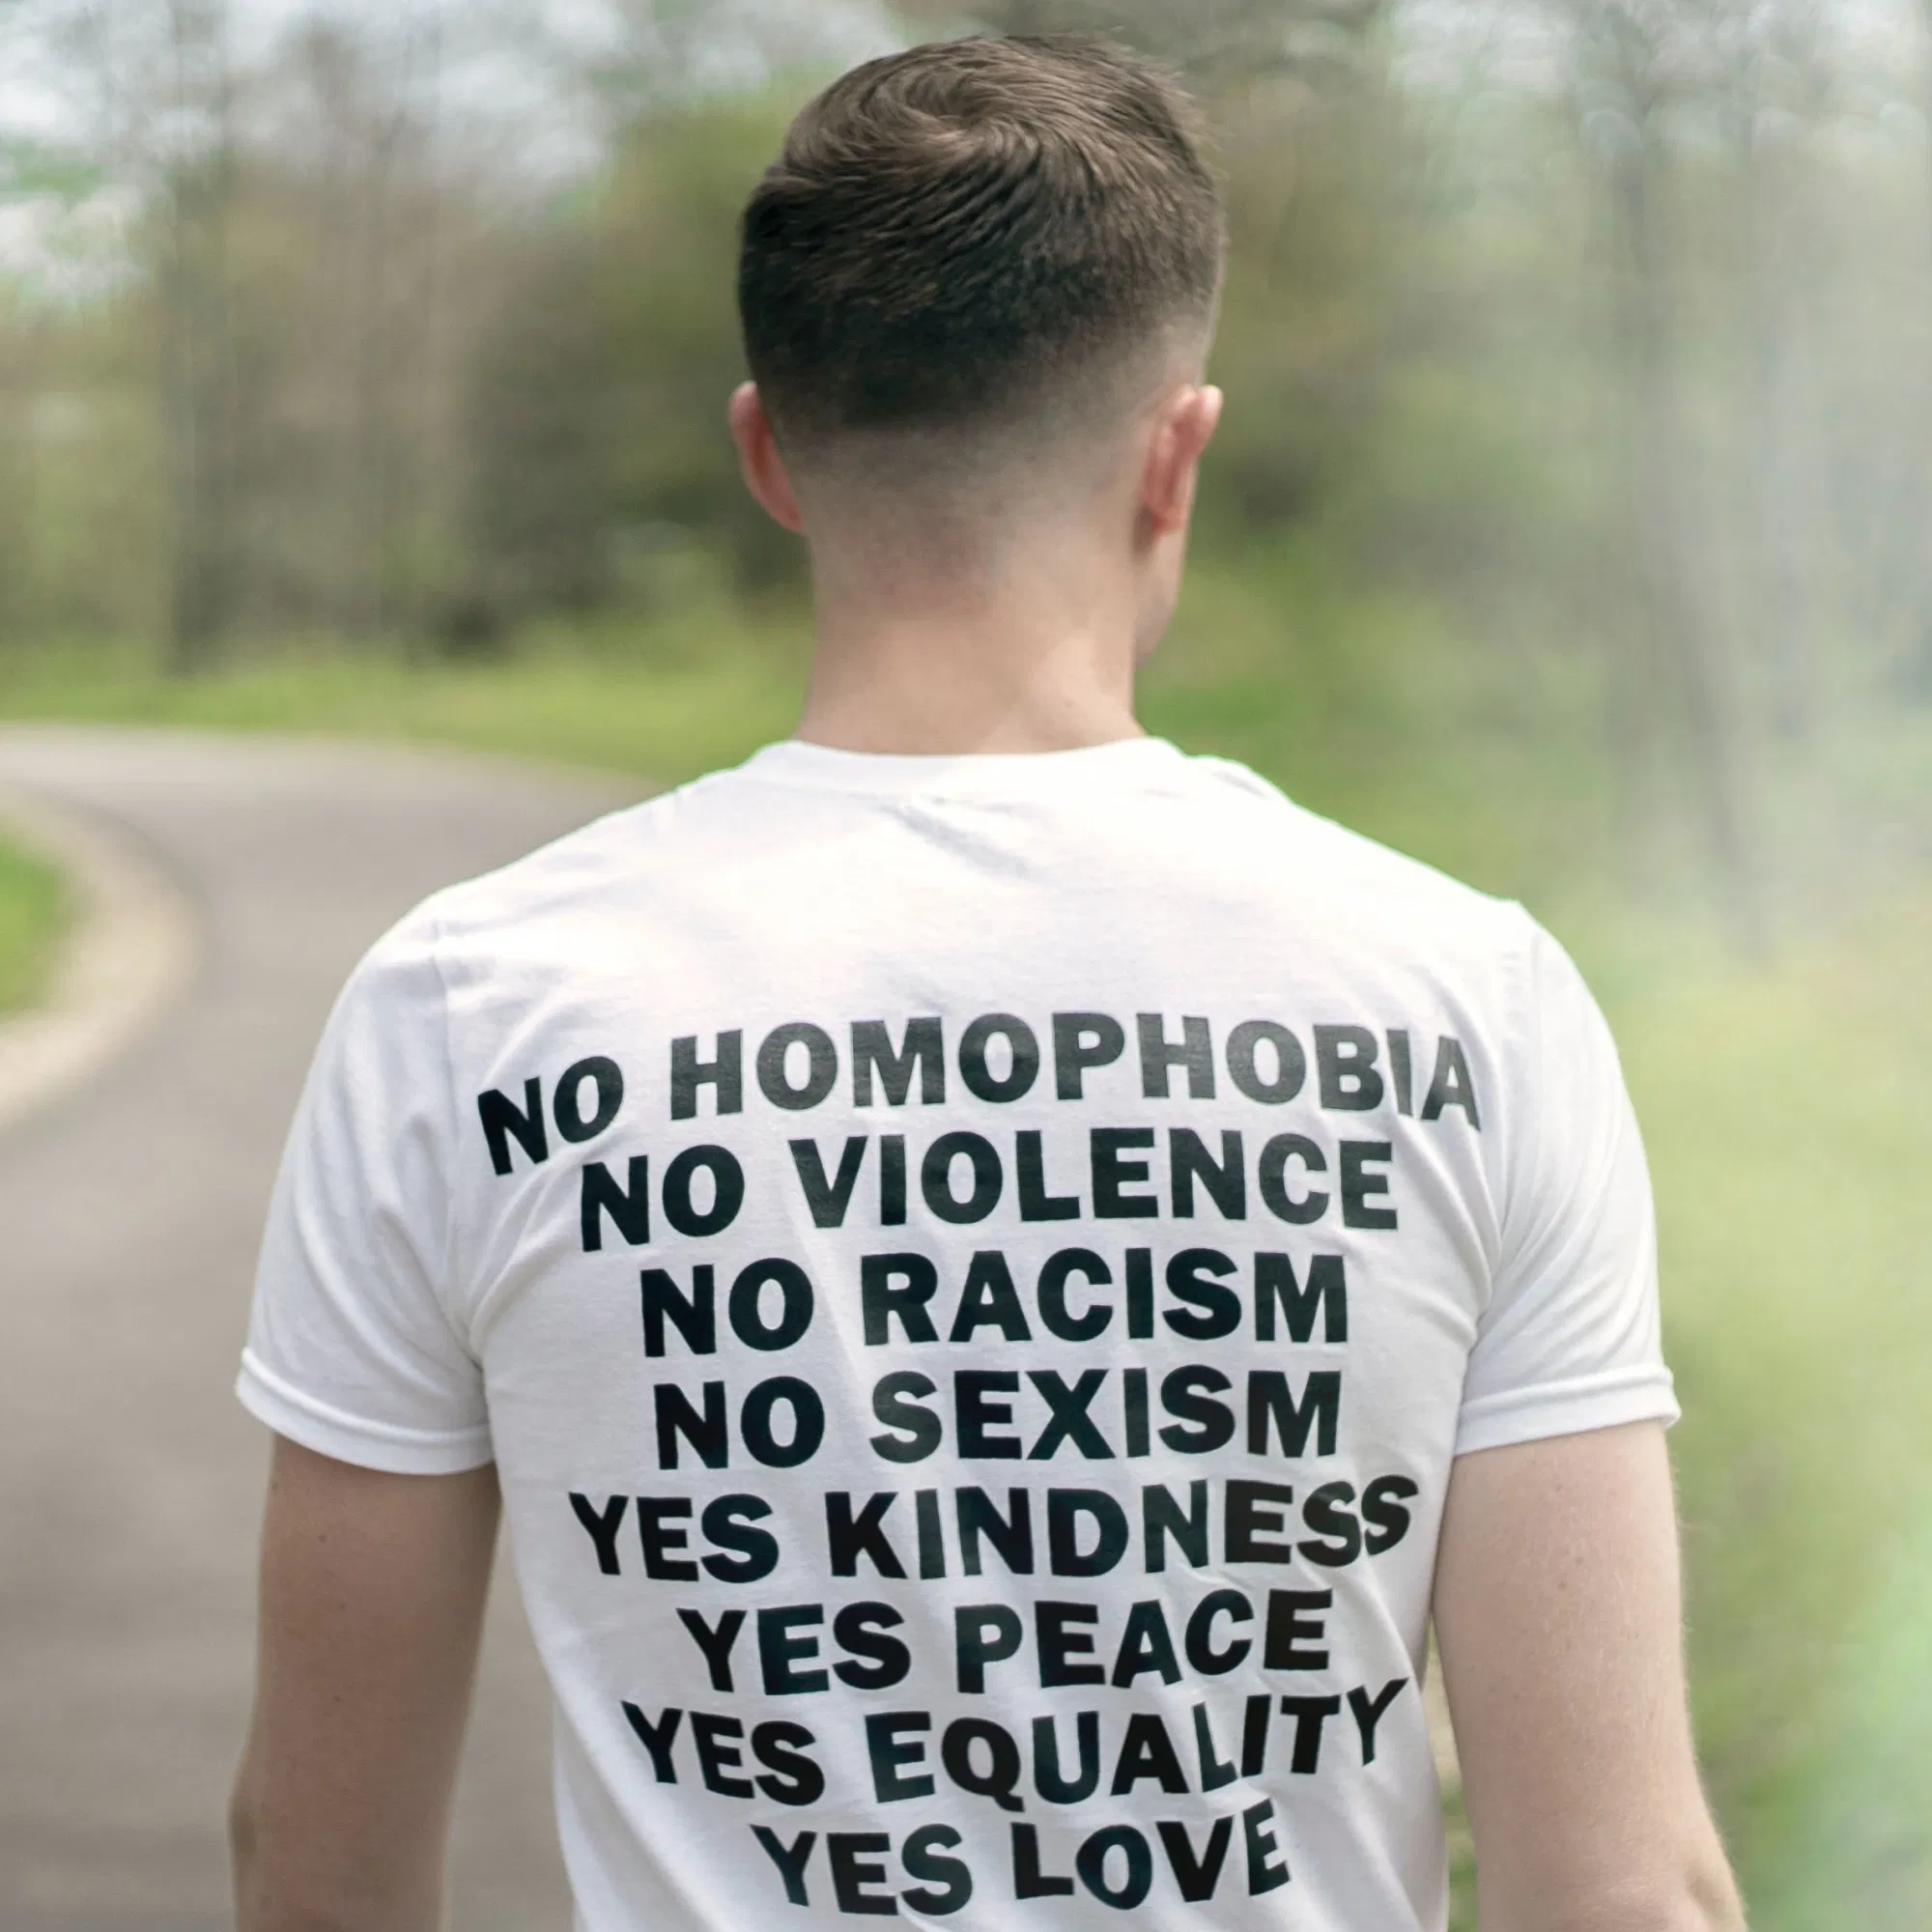 Back of shirt reads "No homophobia no violence no racism no sexism yes kindness yes pease yes equality yes love"